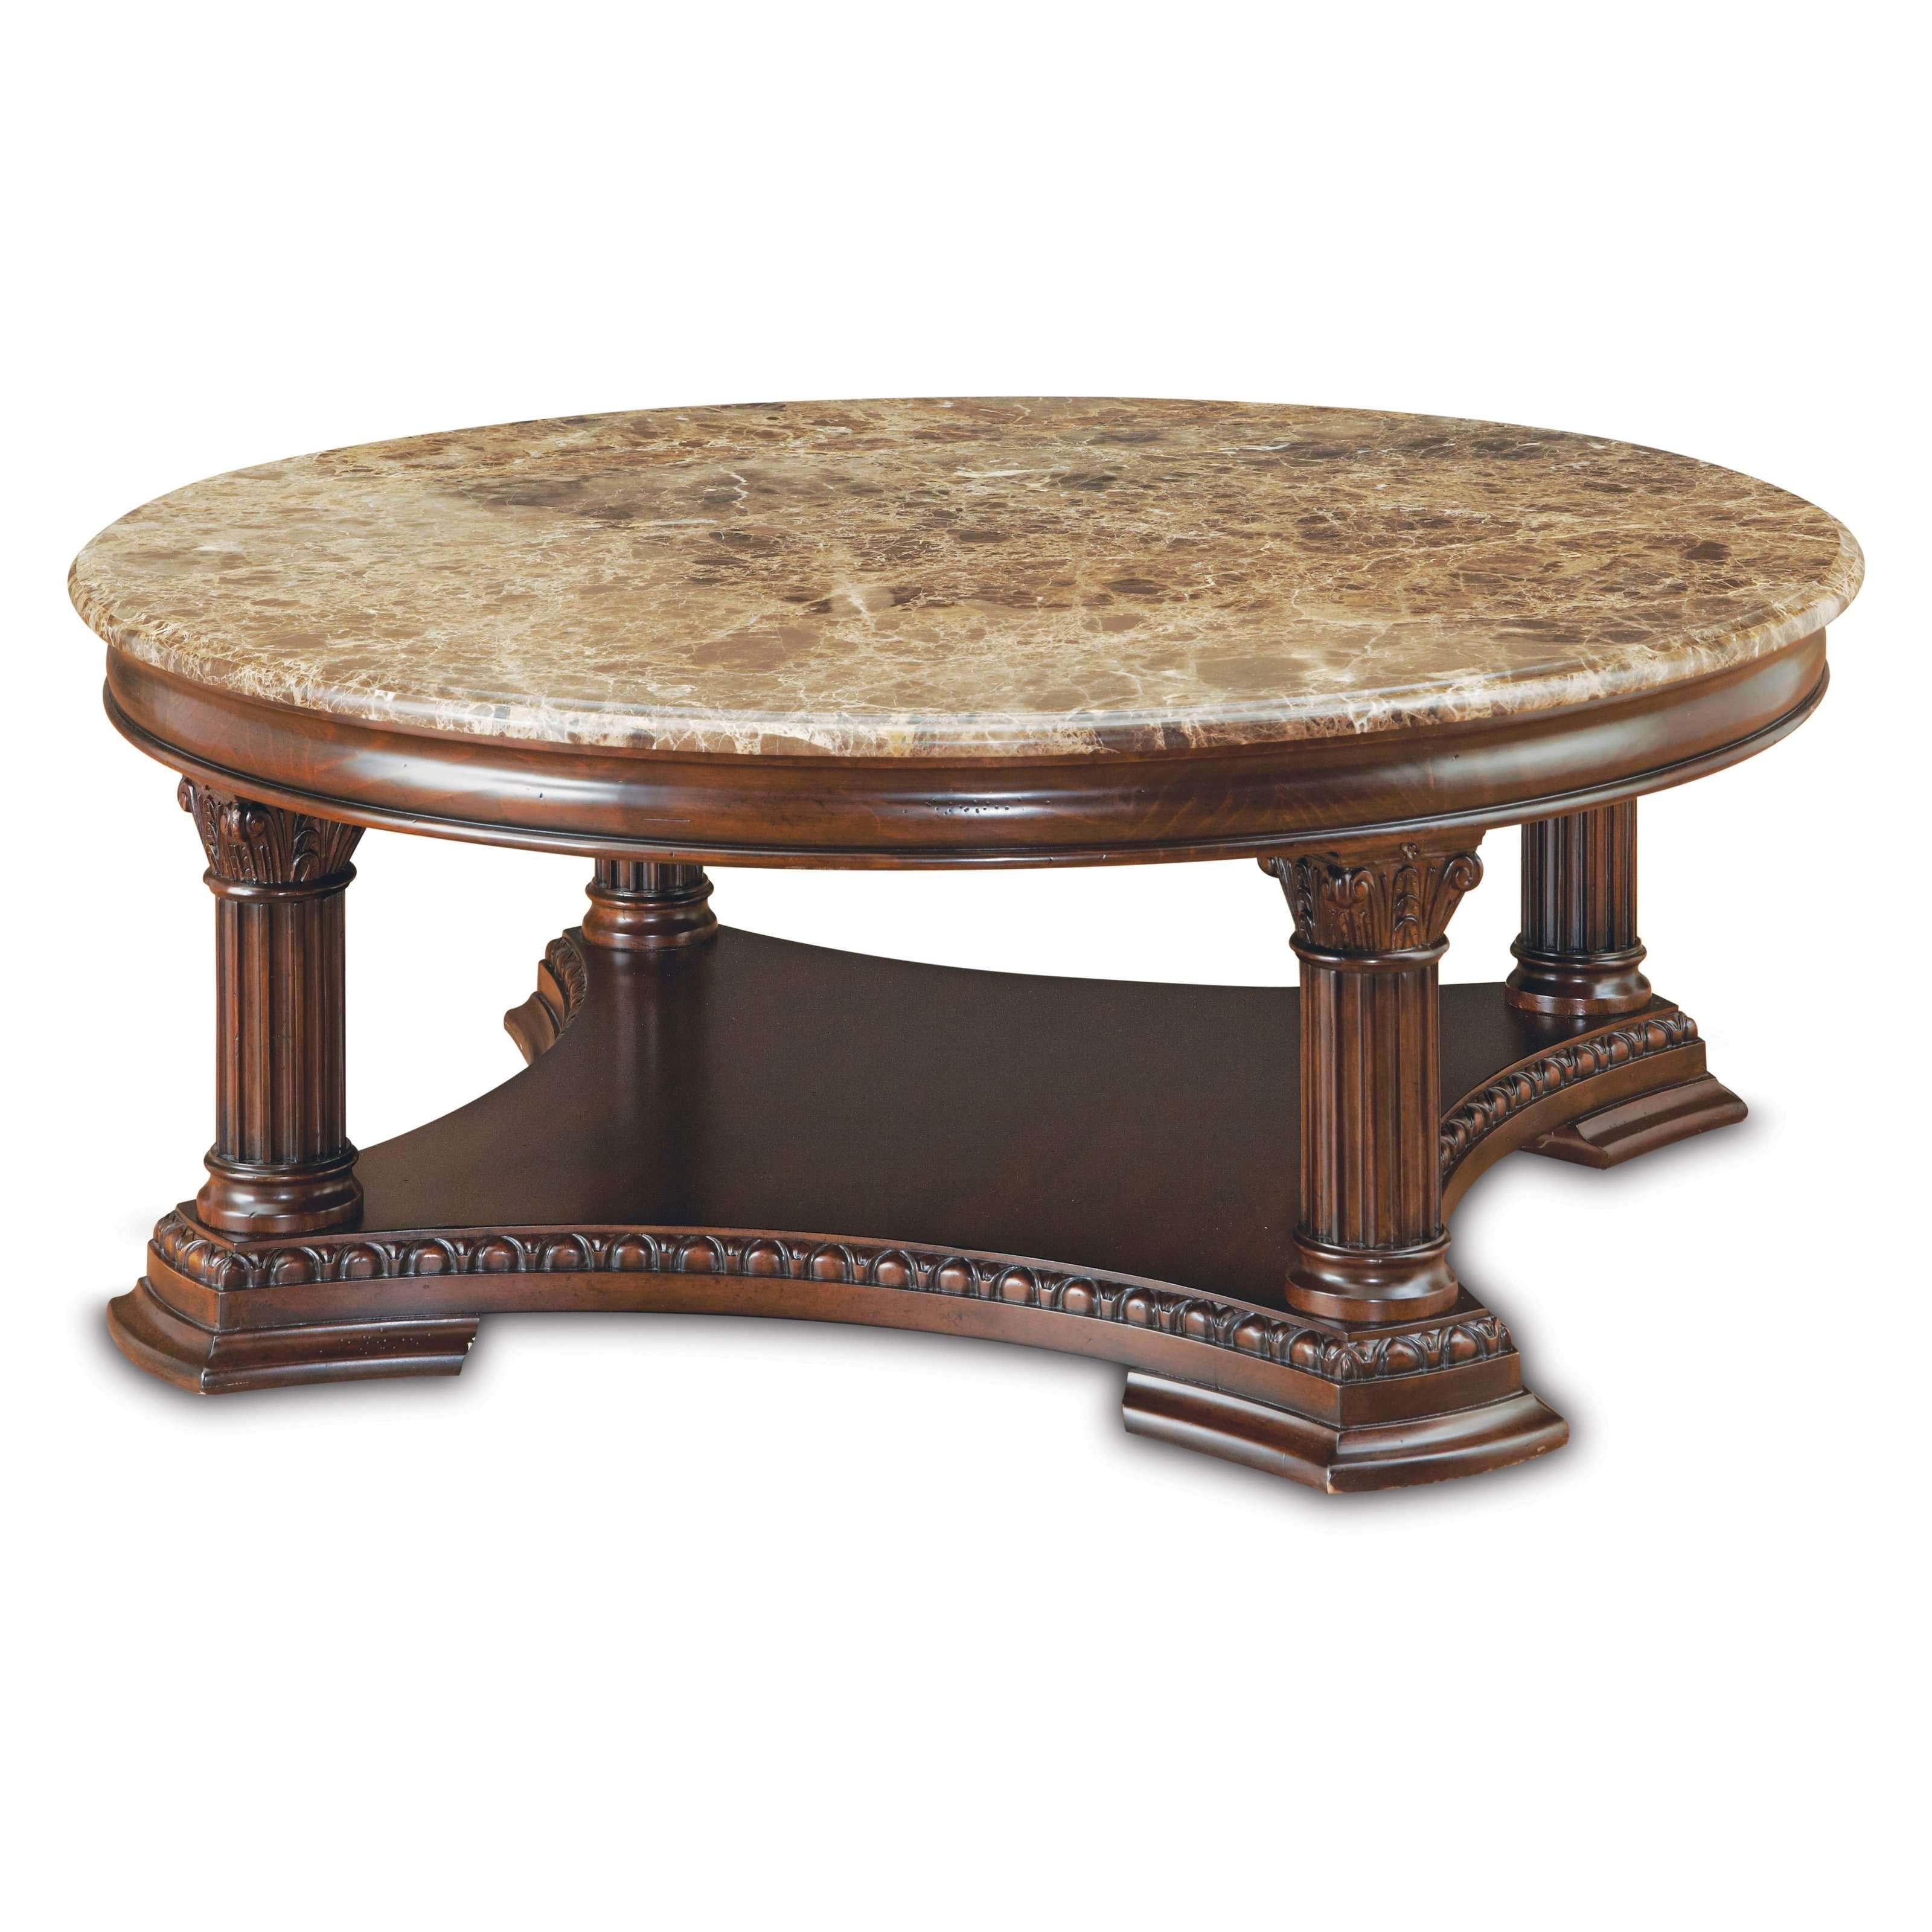 Trendy Dark Wood Round Coffee Tables Throughout Coffee Tables : Marble Table And Glass Coffee Round Side Living (View 10 of 20)